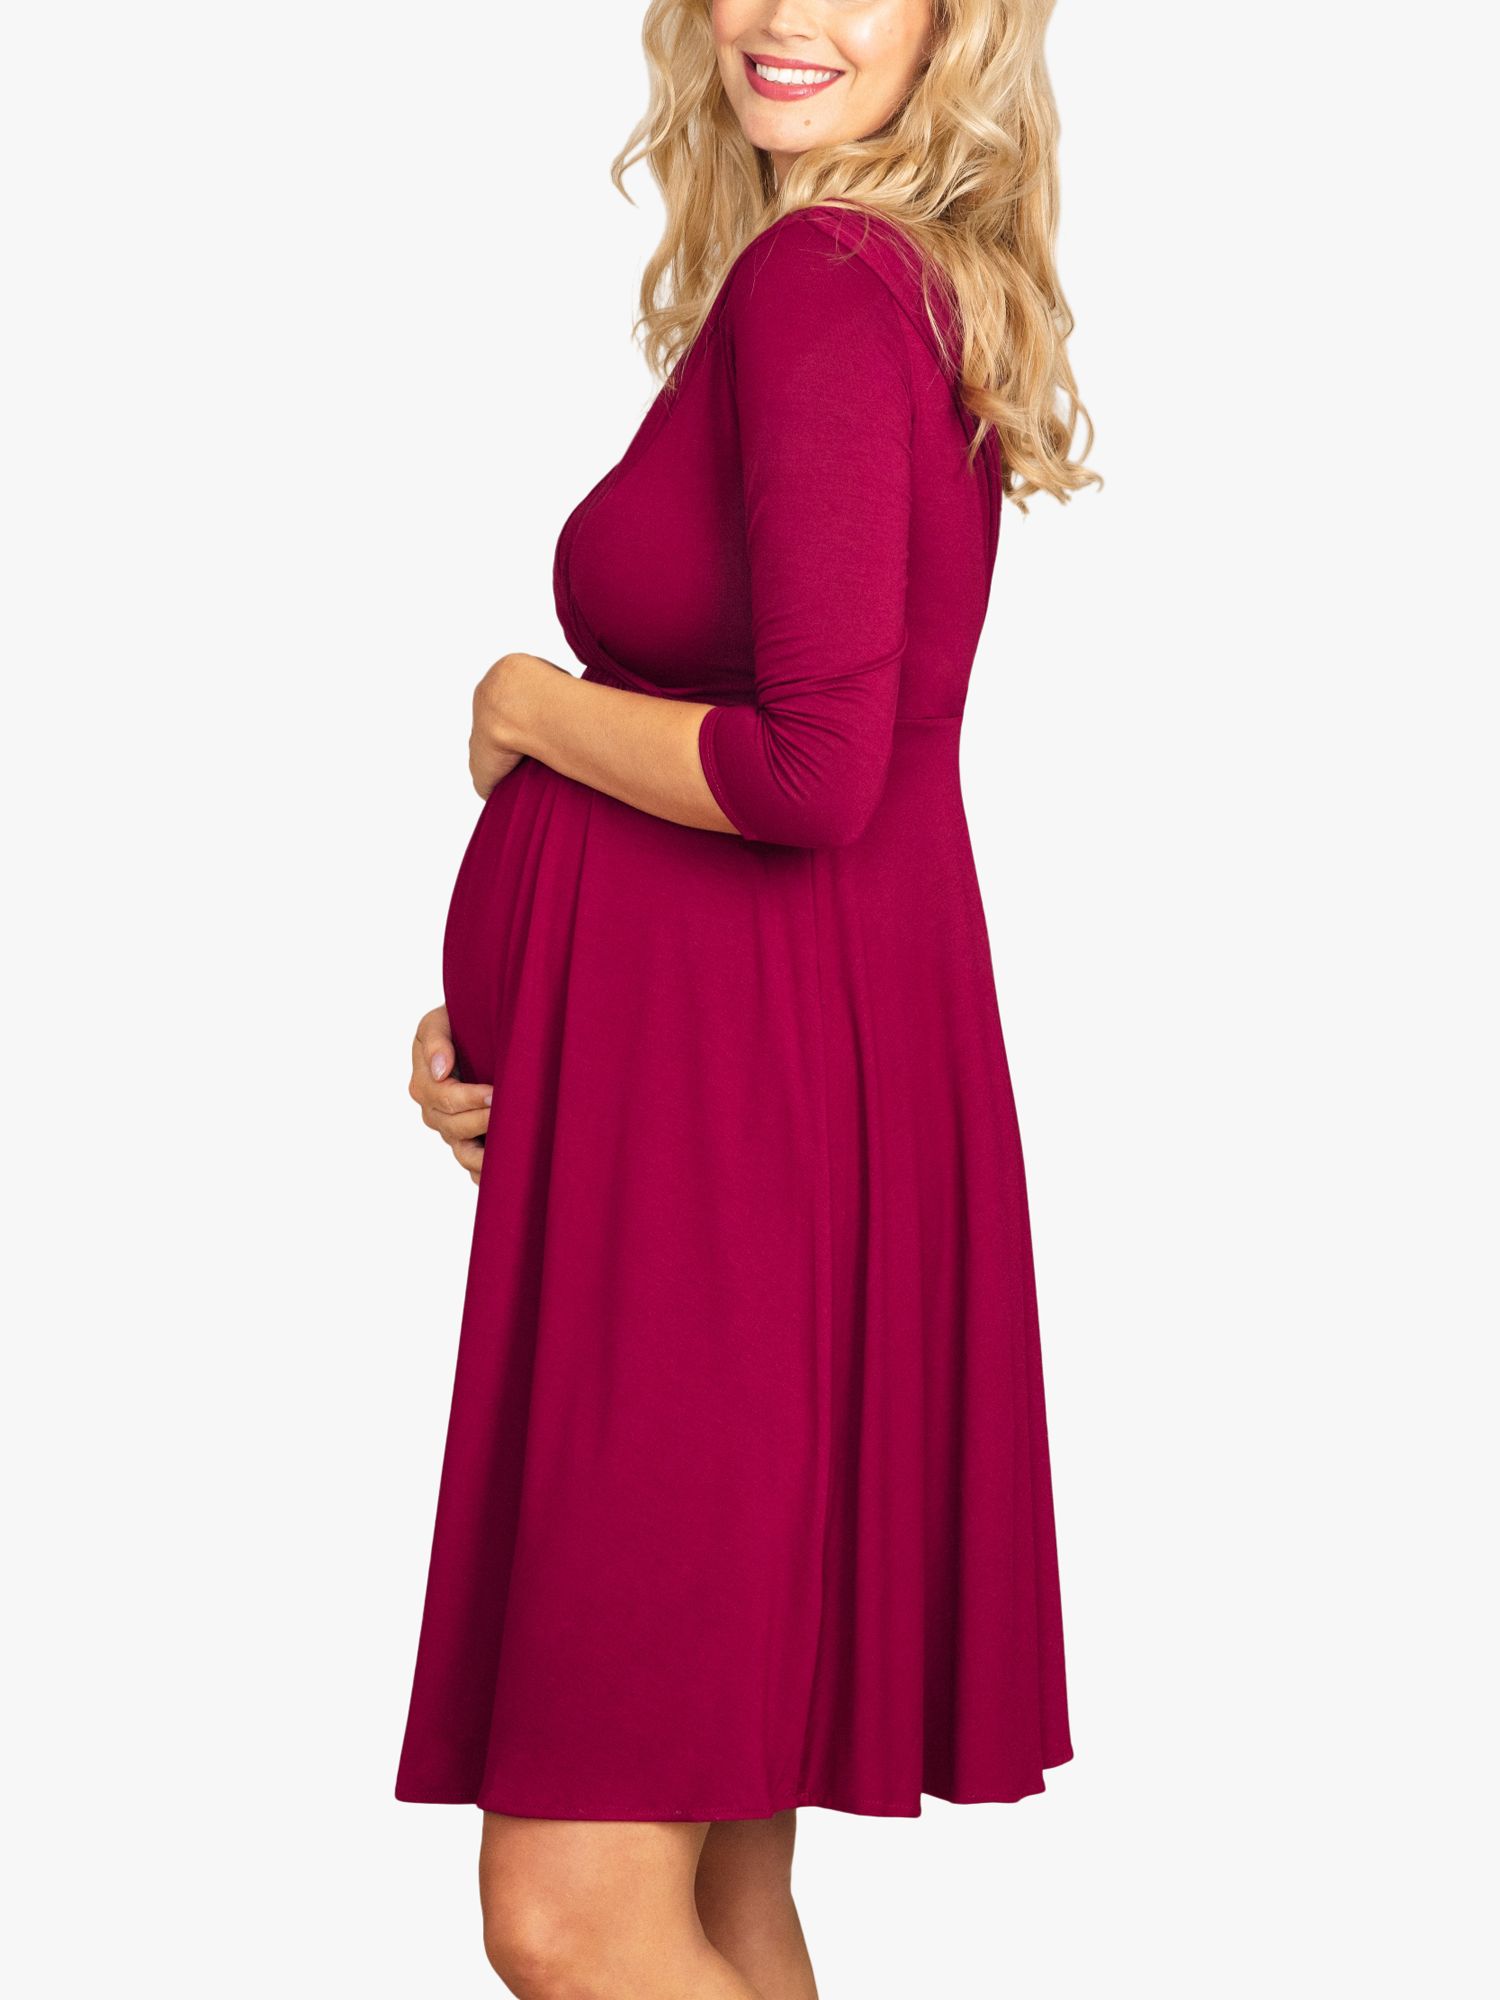 Buy Tiffany Rose Willow Maternity Dress Online at johnlewis.com